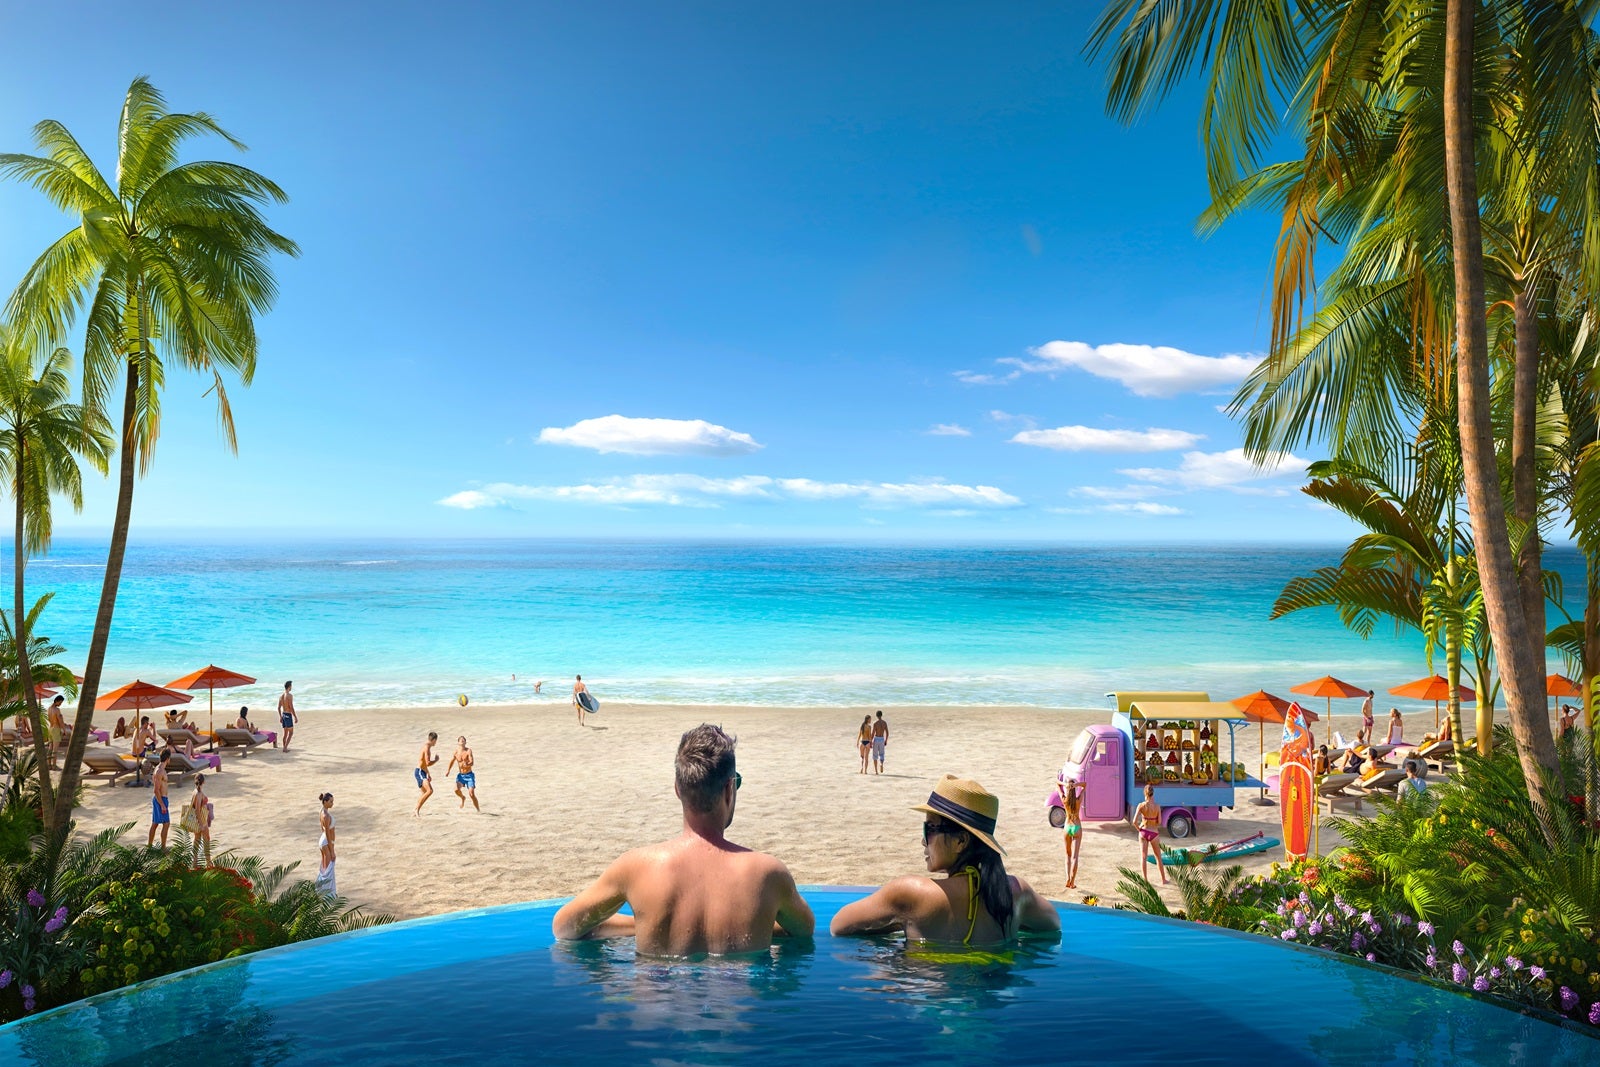 A rendering of two people in a hot tub overlooking a beach with people on the sand looking out at the water